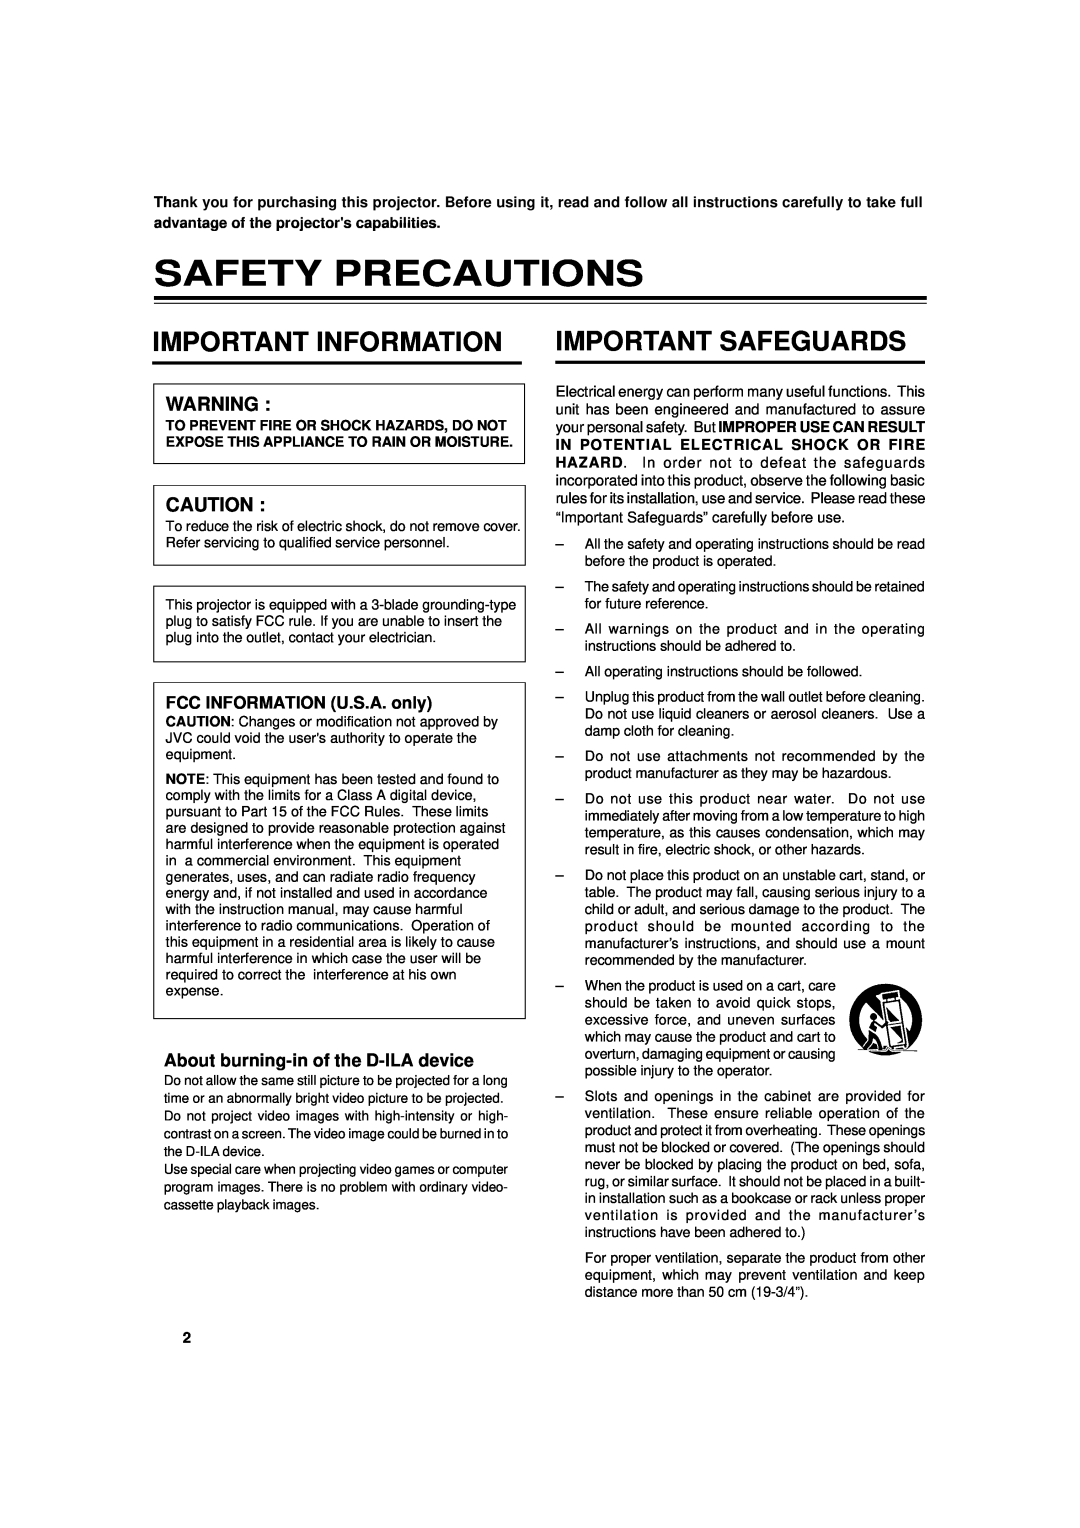 JVC DLA-G11U manual Safety Precautions, Important Information Important Safeguards, About burning-in of the D-ILA device 